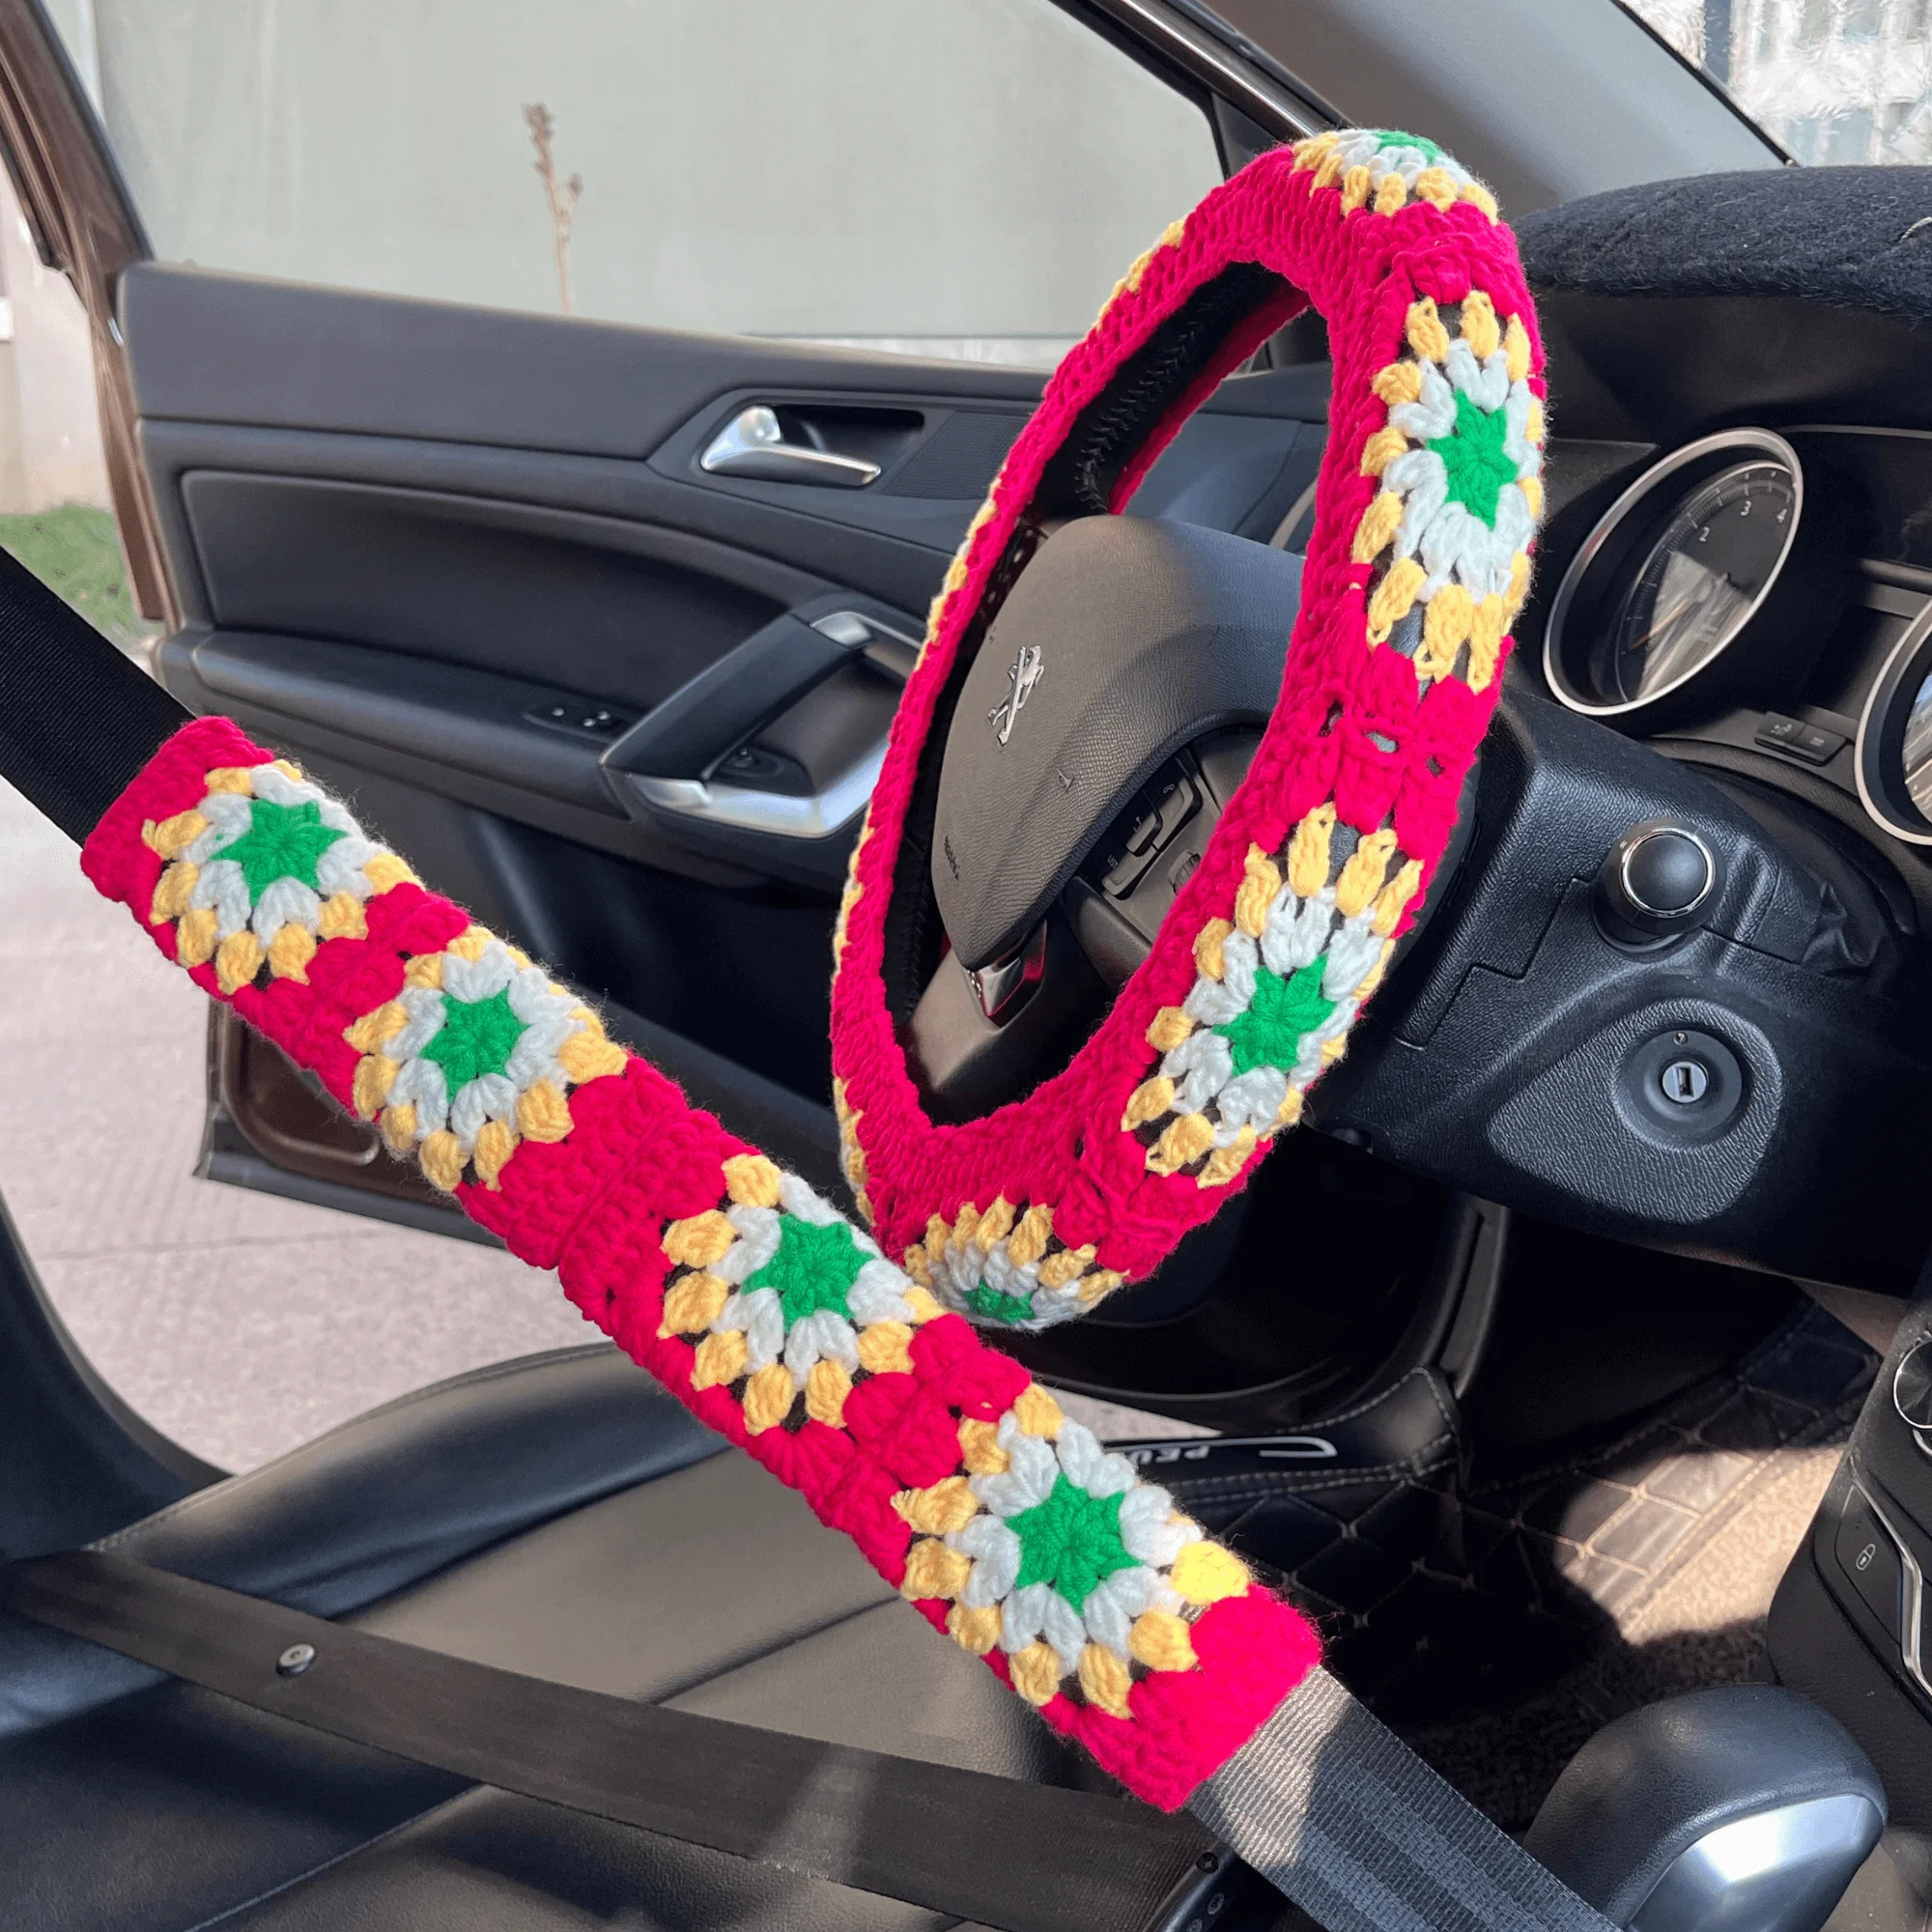 

Knitting Yarn Crochet Steering Wheel Cover For Car Accessory 38cm Sunflower Car Seat Belt Cover Knitted Anti Slip Interior Parts